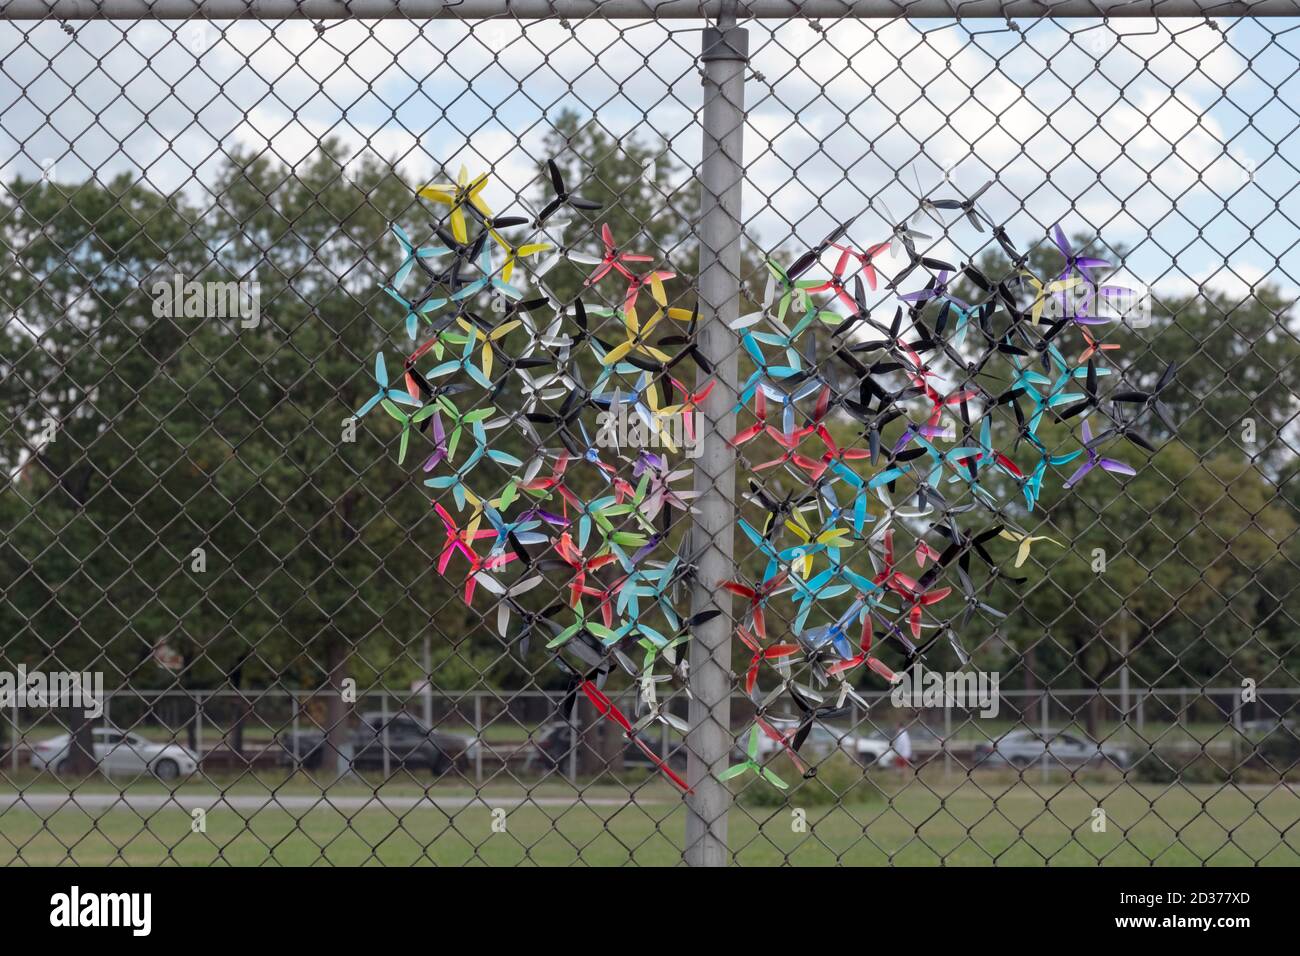 A large sized heart made out of plastic airplanes and stuck in a chain link fence. In Flushing Meadows Corona Park in Queens, New York City. Stock Photo